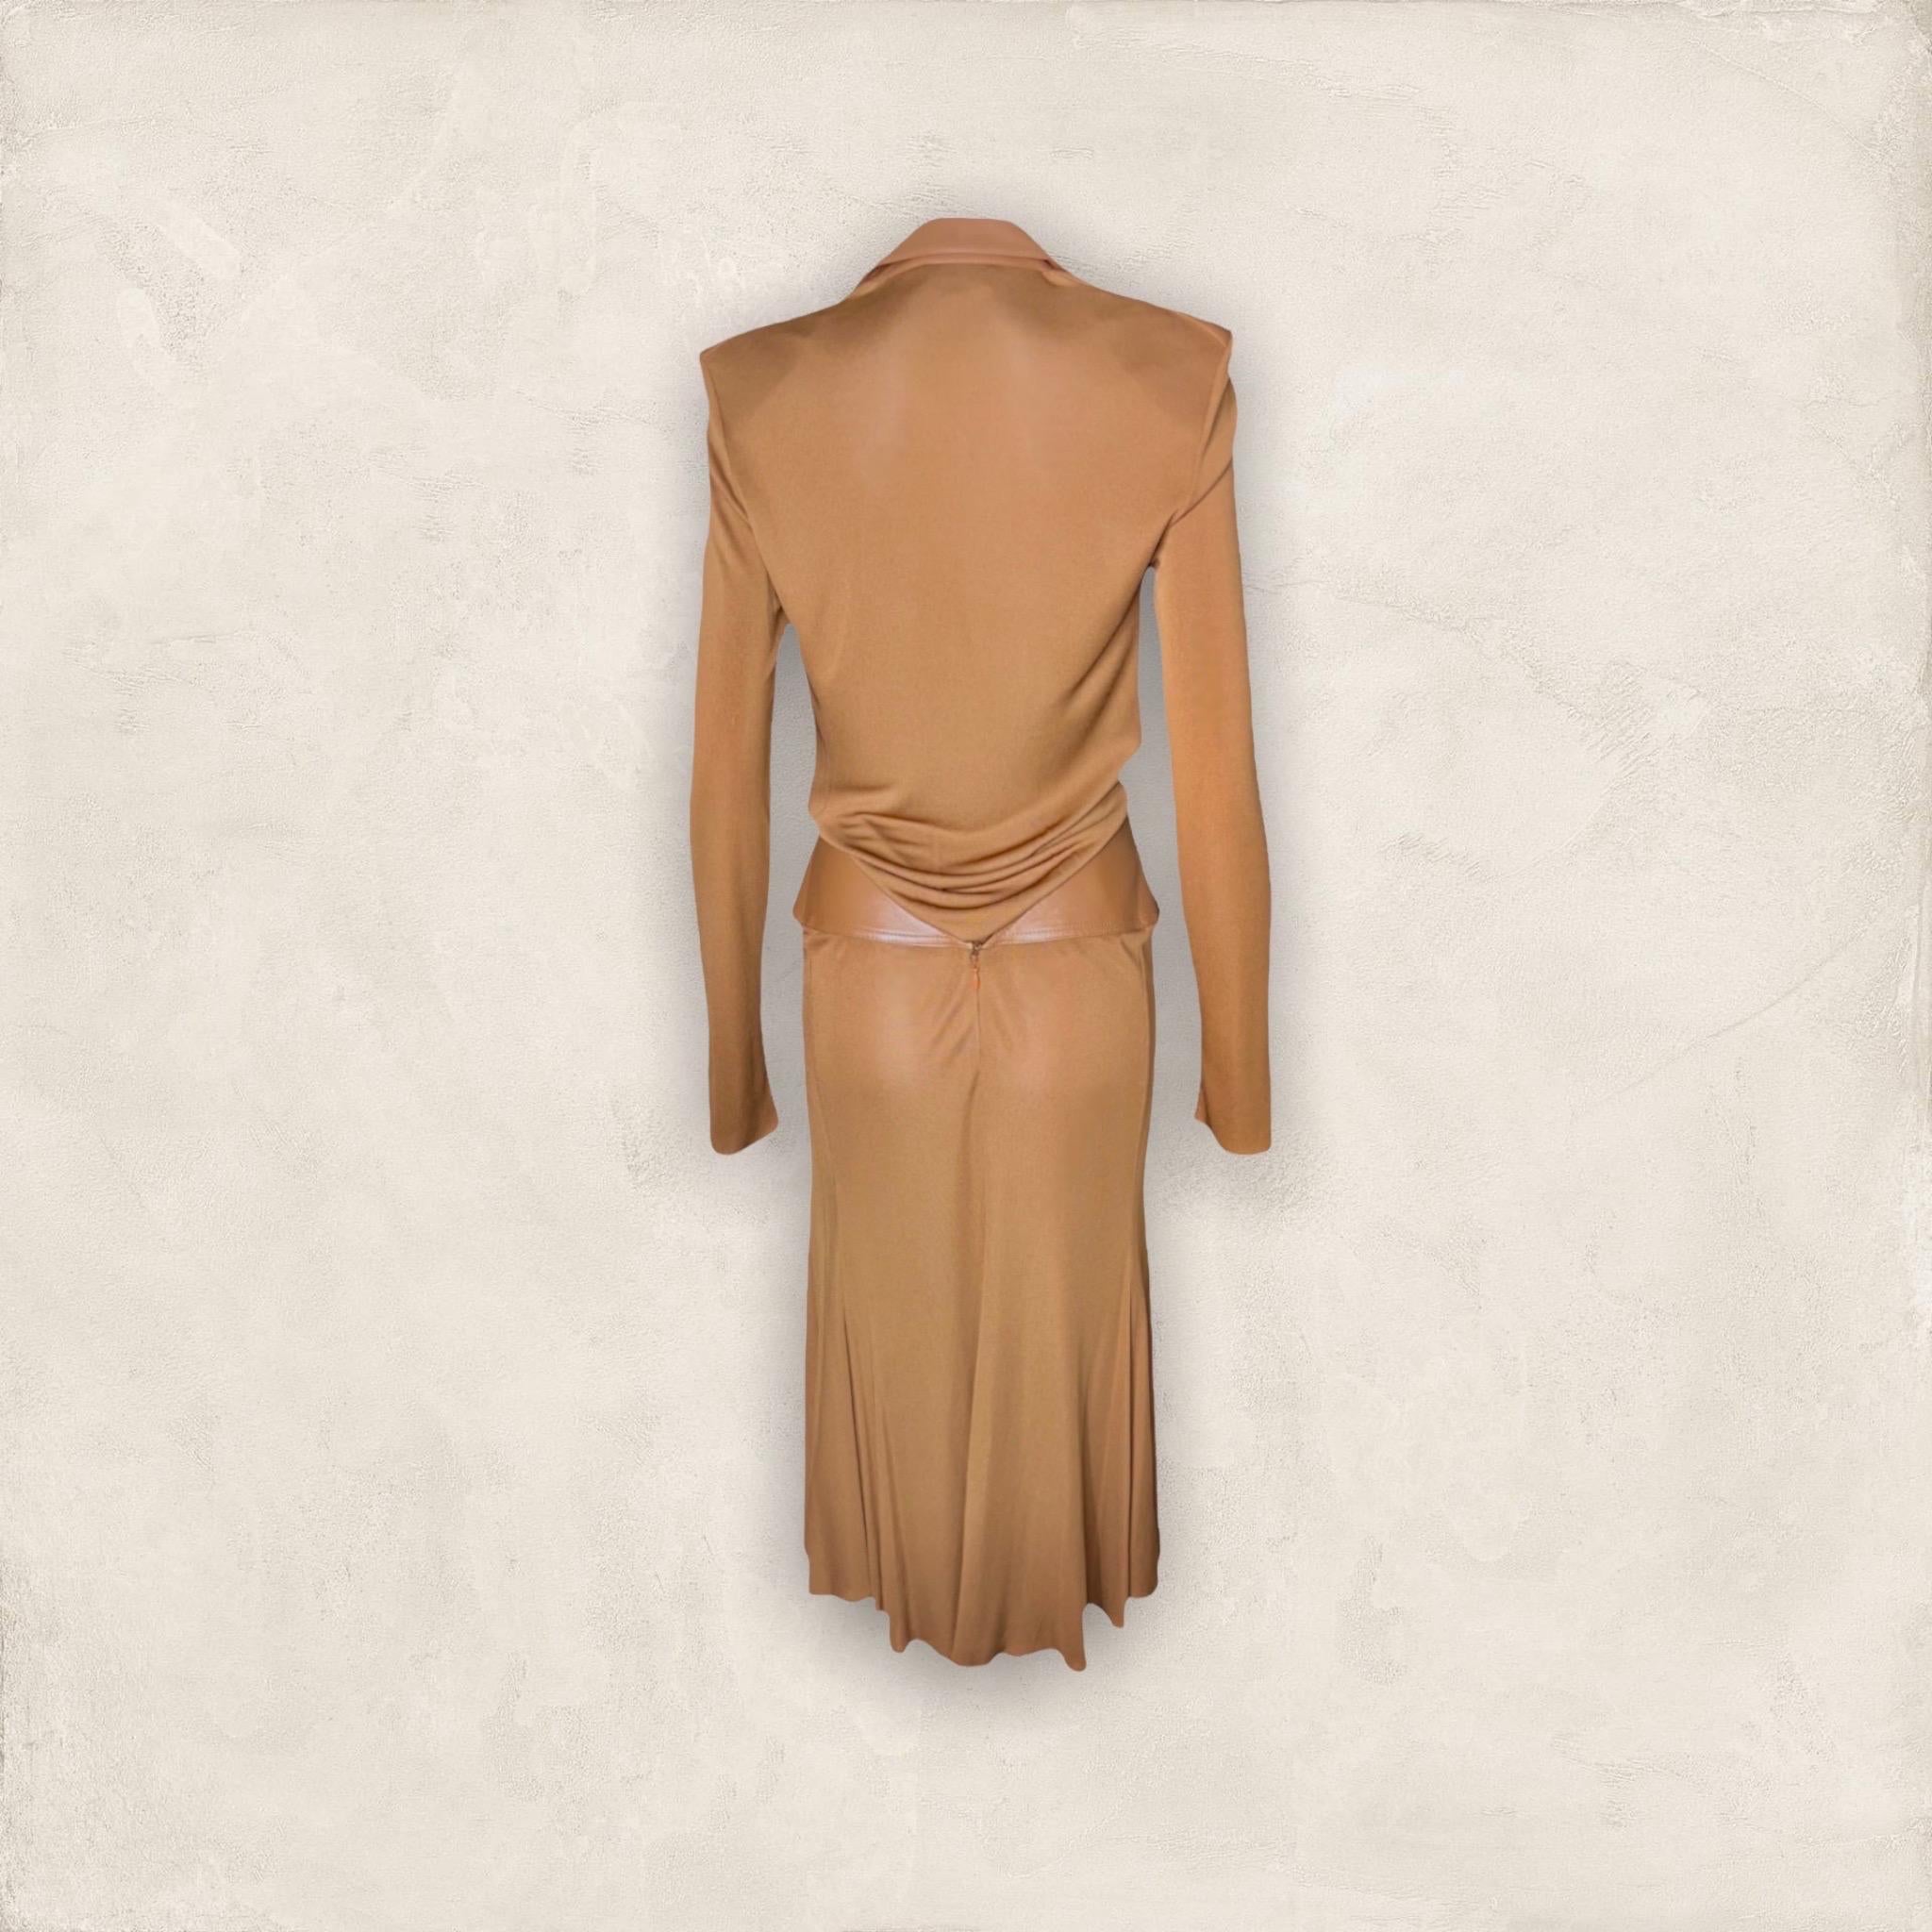 UNWORN Gianni Versace Couture 2001 Rare Cognac Brown Leather Evening Dress 40 For Sale 3